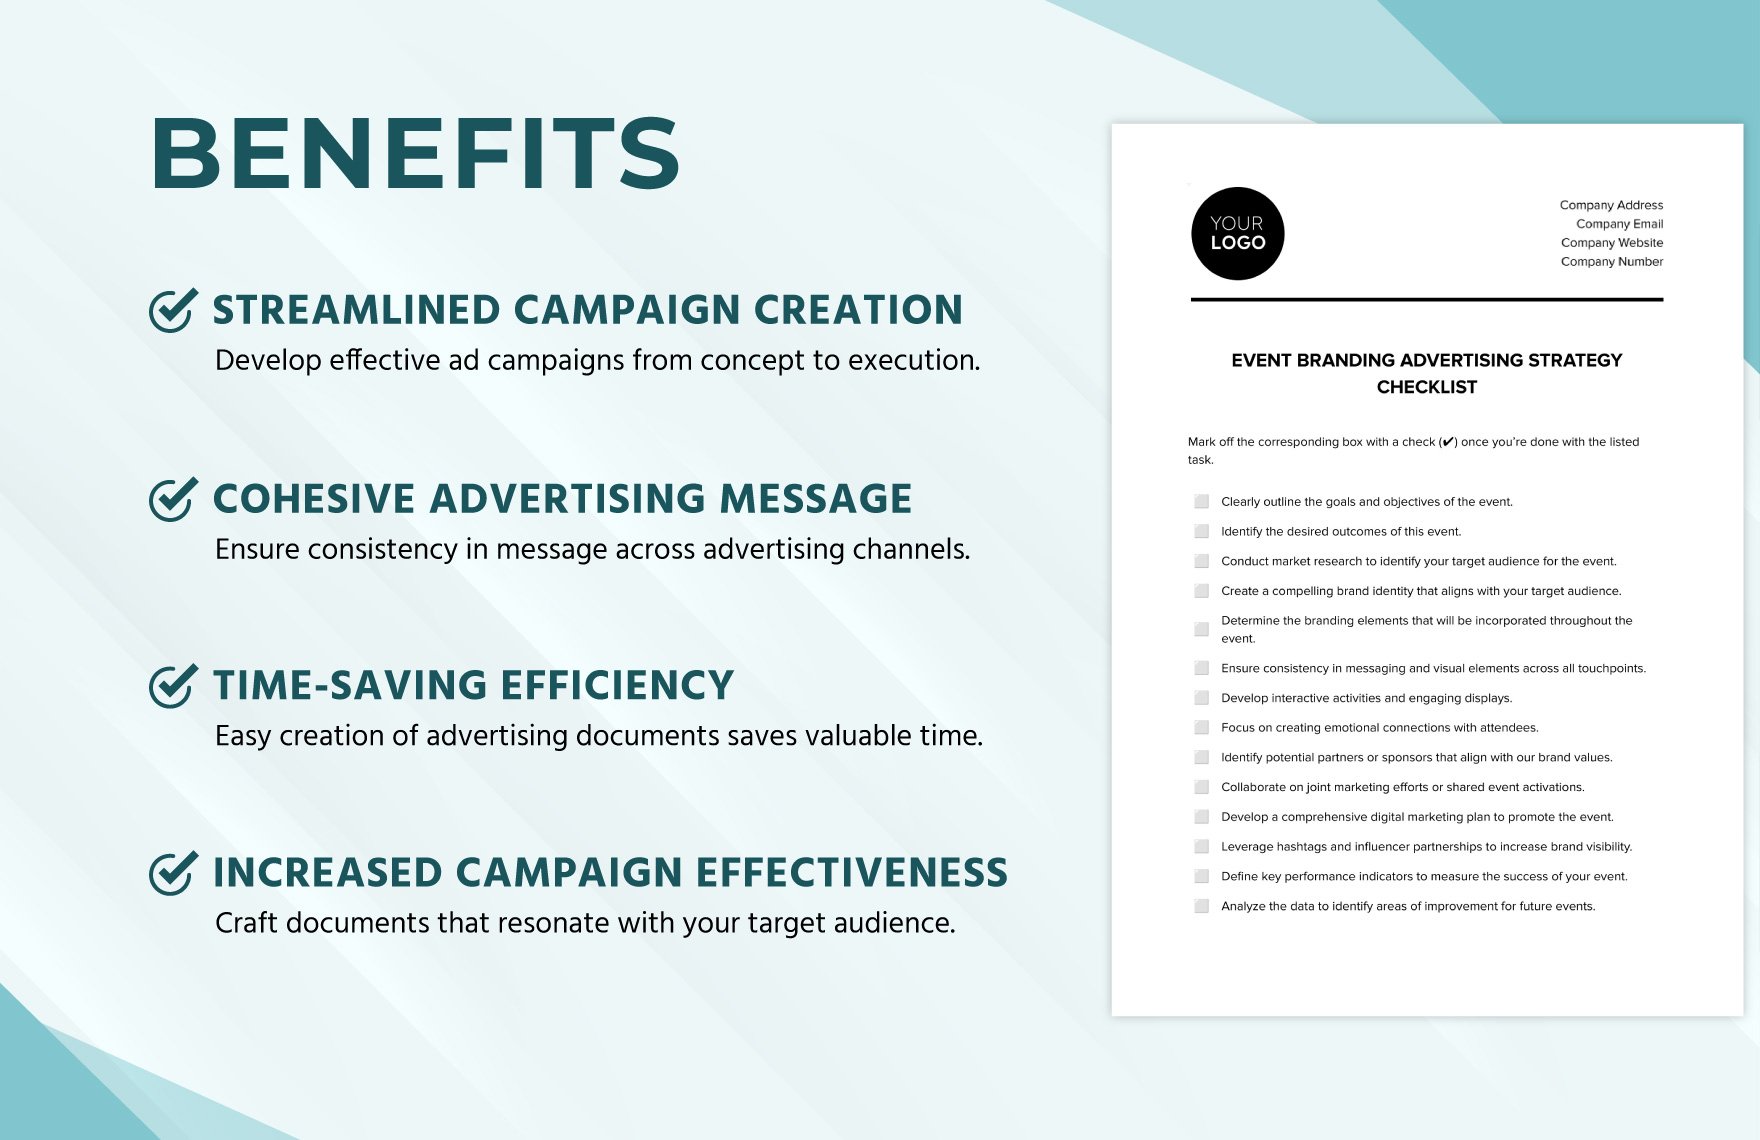 Event Branding Advertising Strategy Checklist Template